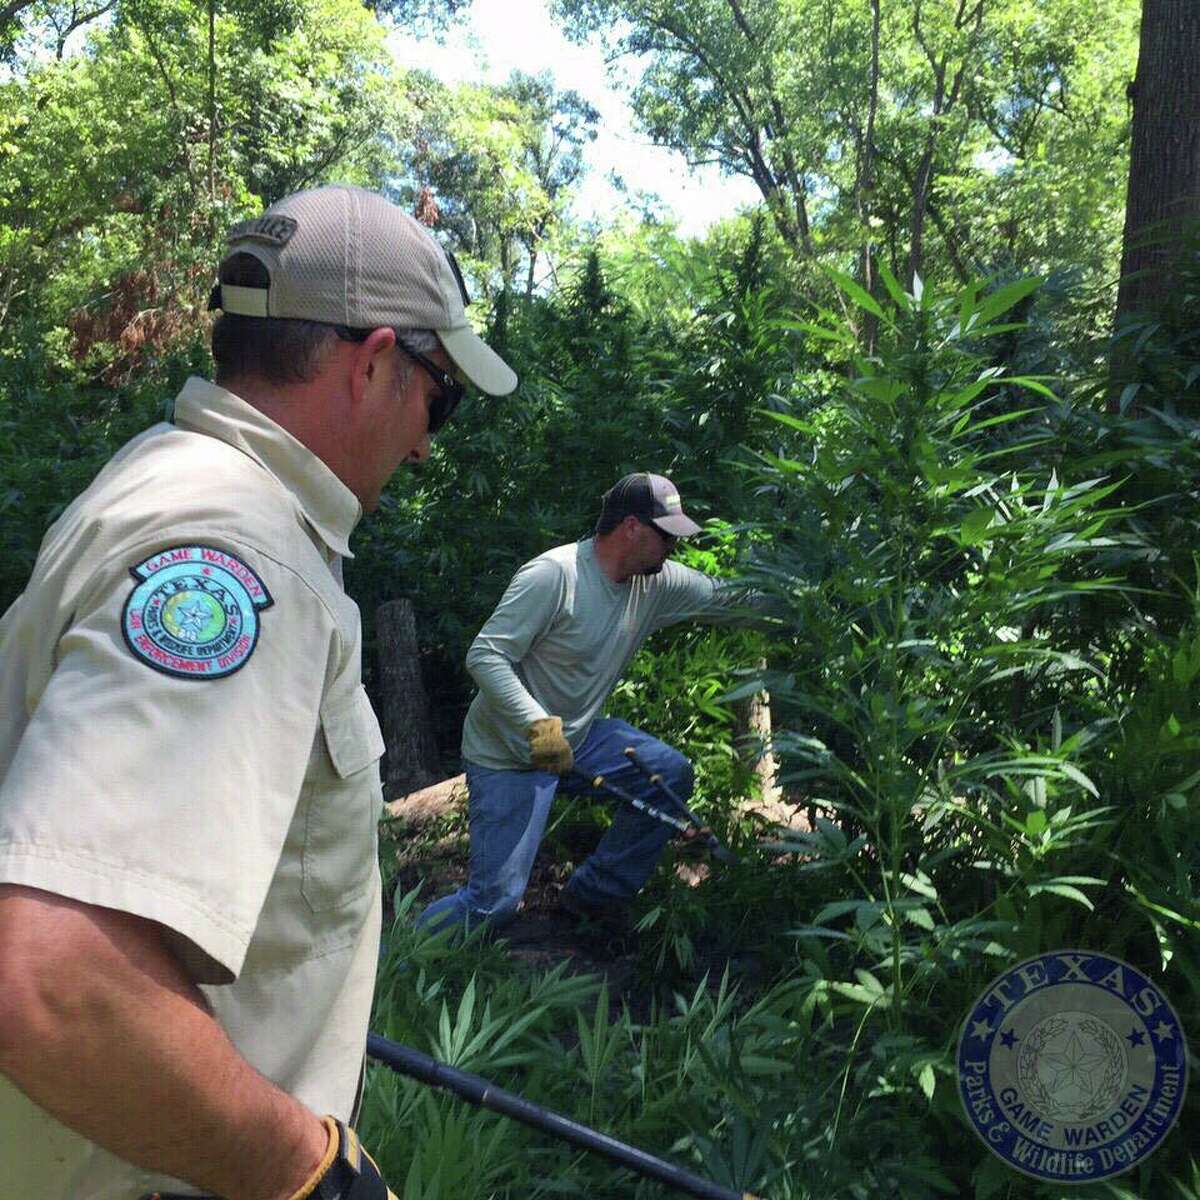 TPWD game wardens removed more than $6 million worth of marijuana plants from state park land over the weekend.